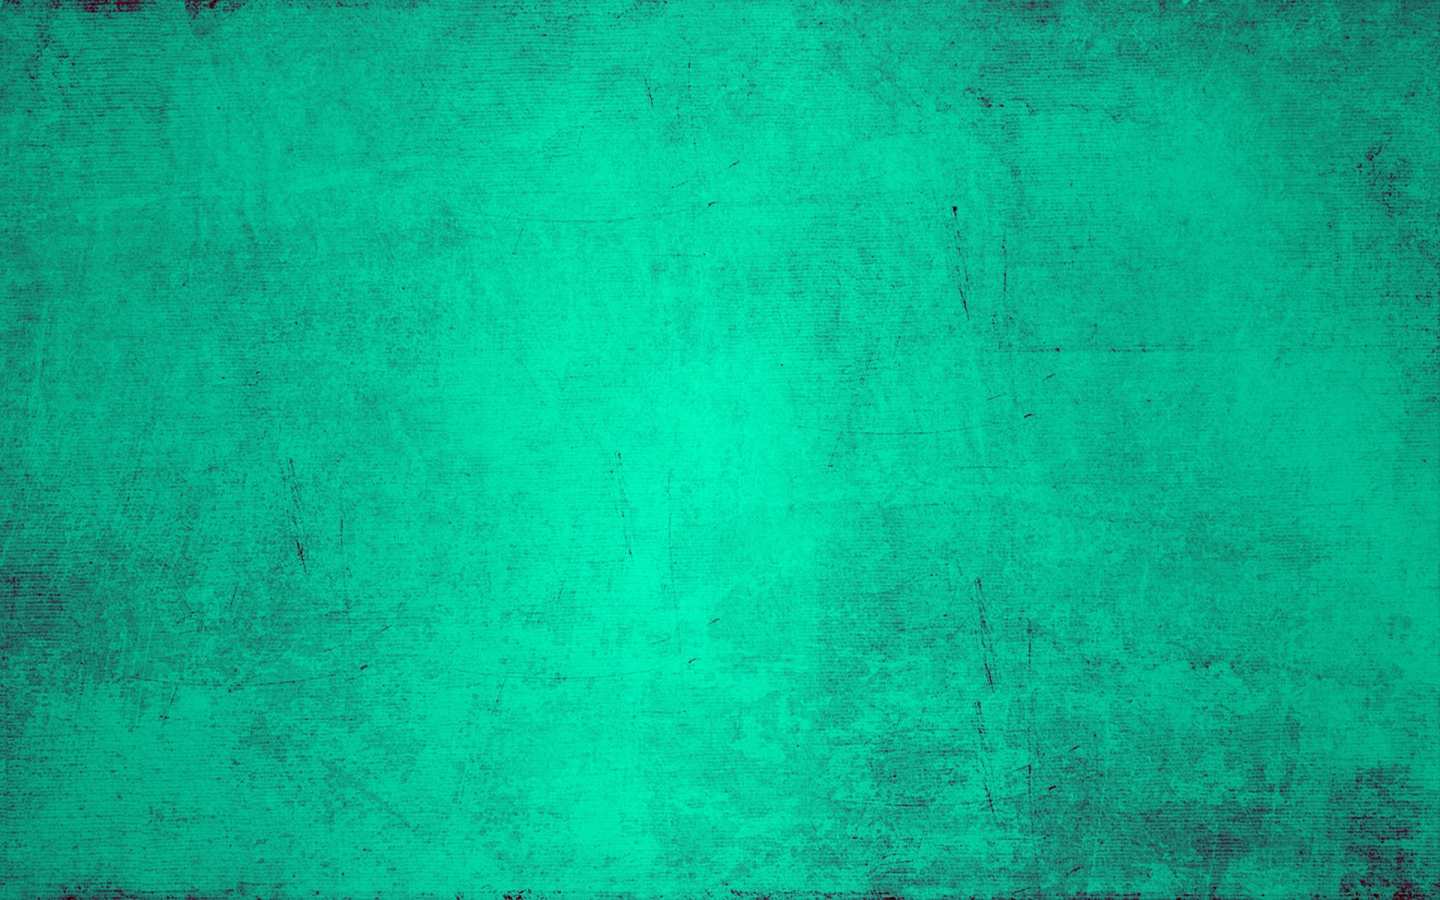 Pin Grunge Turquoise Texture Wallpaper For Pc Mac Iphone And Ipad on 1440x900